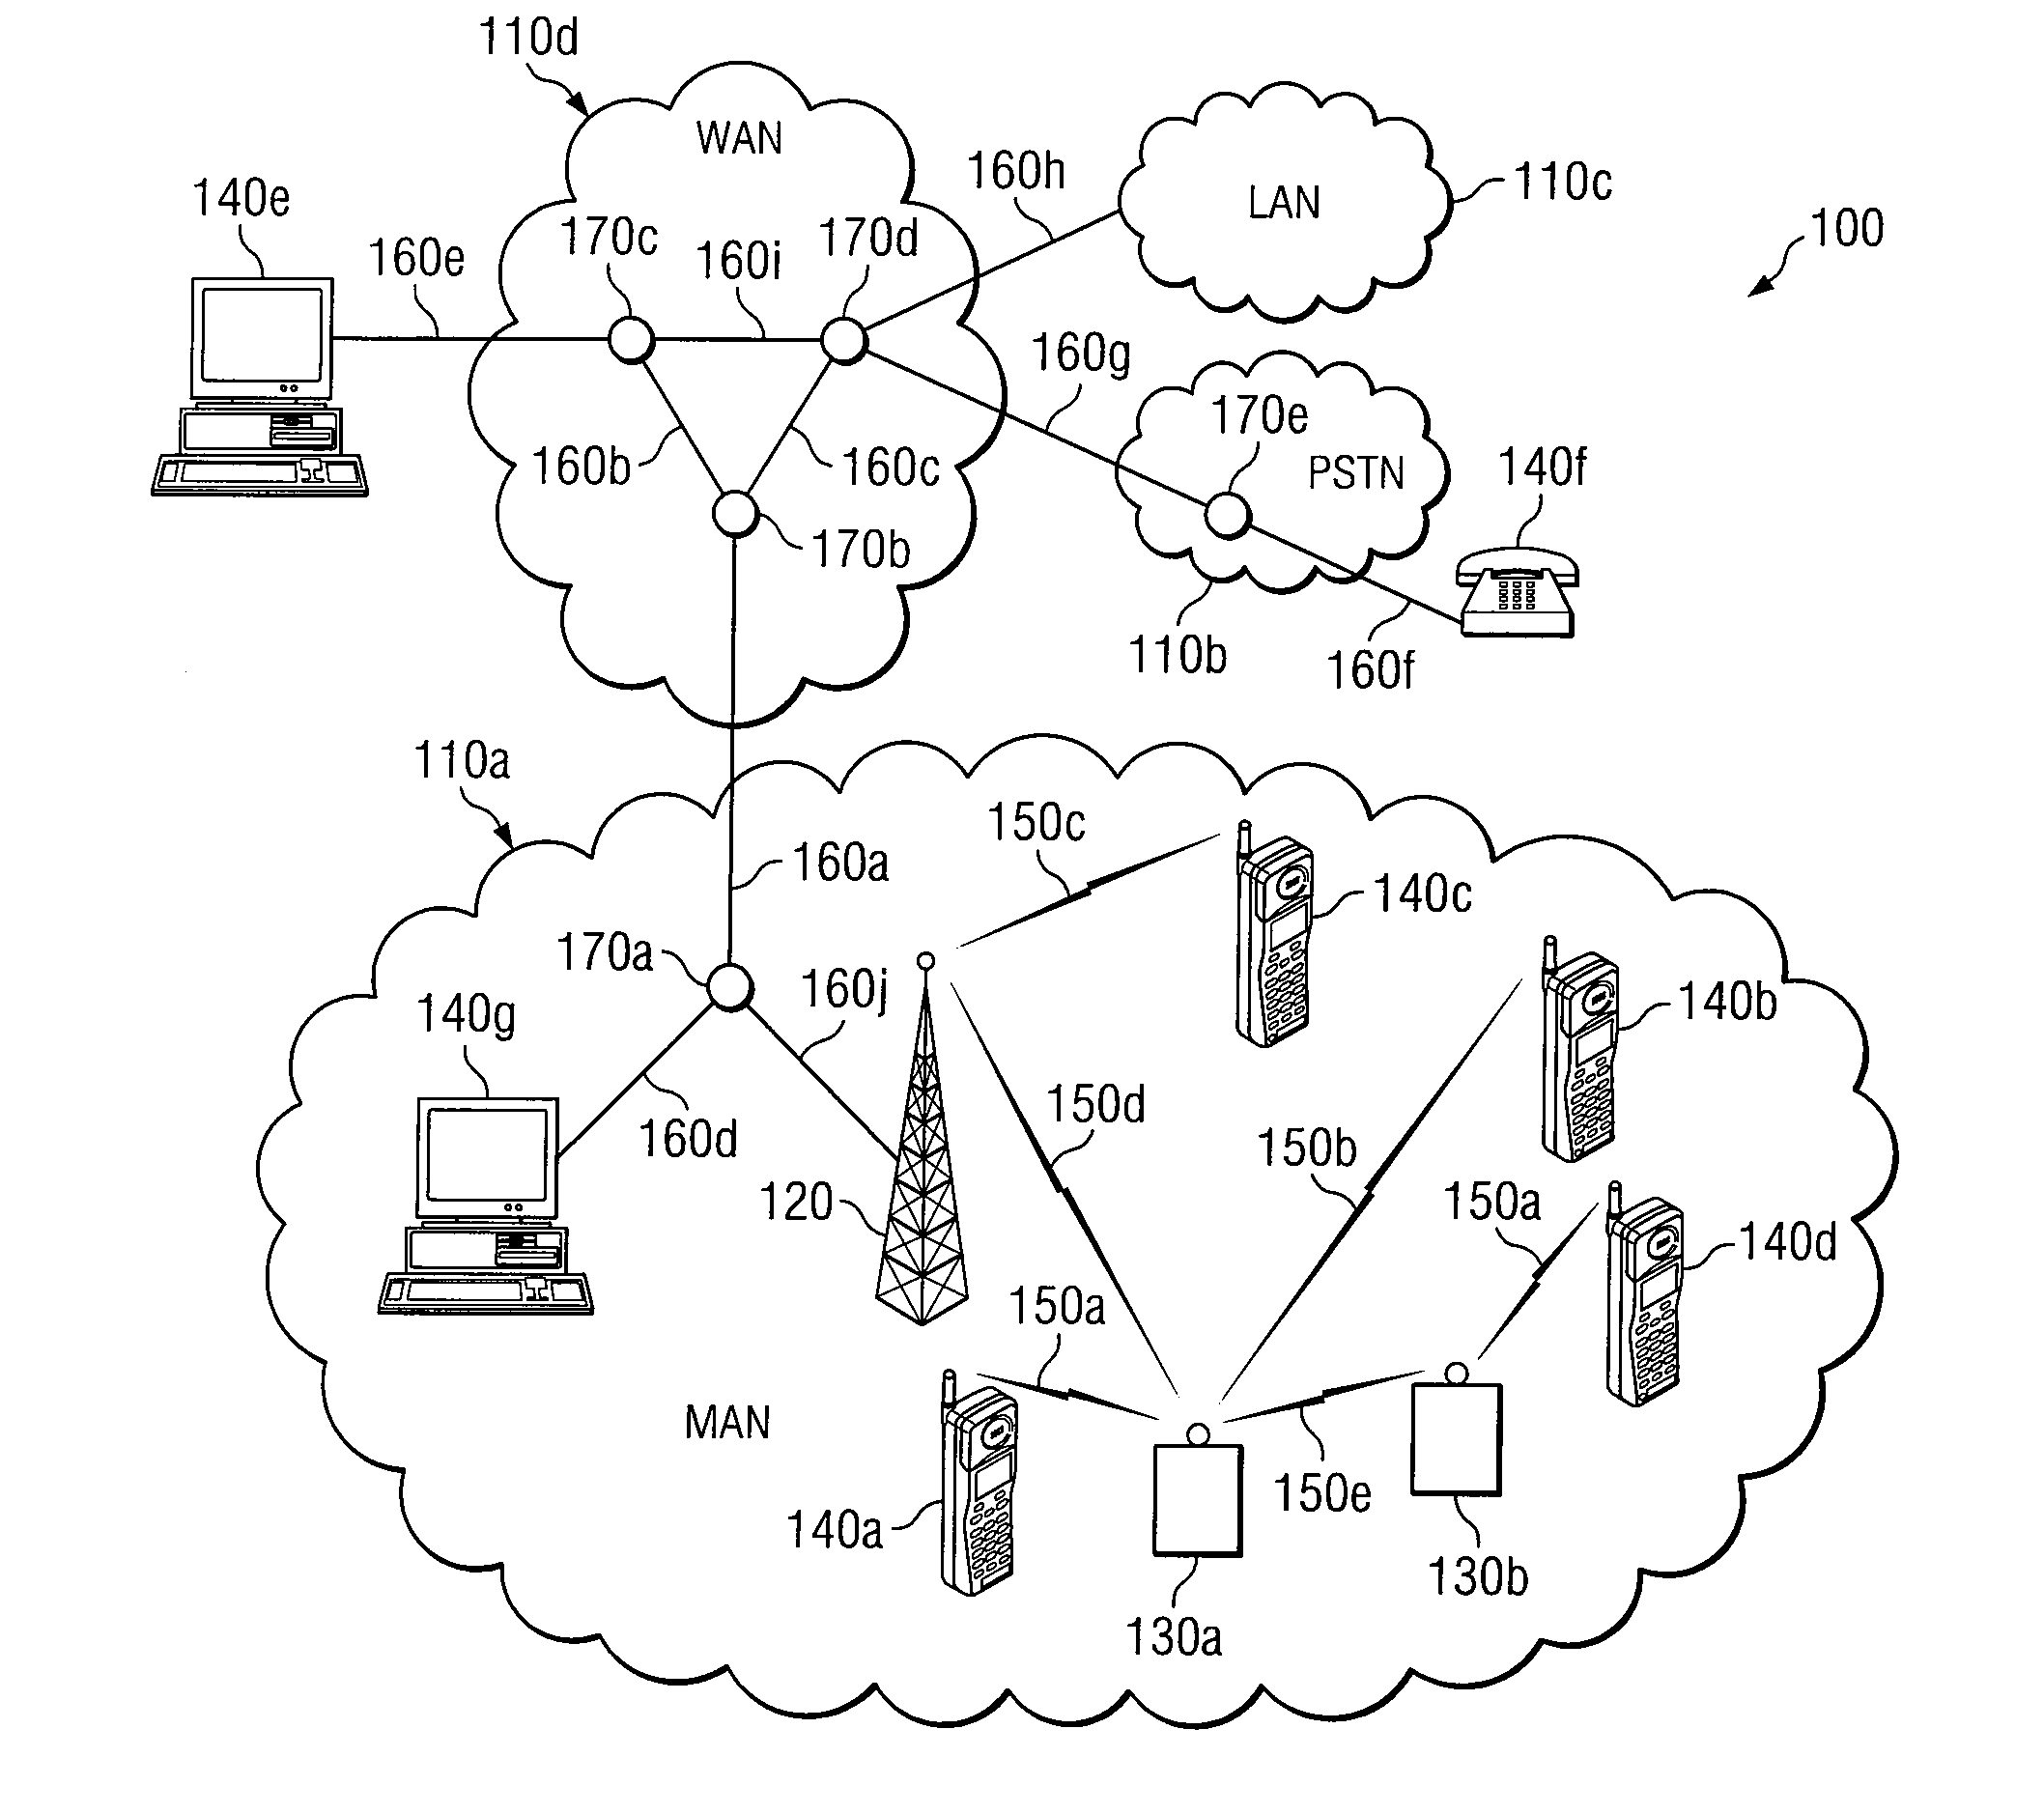 System and Method for Reusing Wireless Resources in a Wireless Network